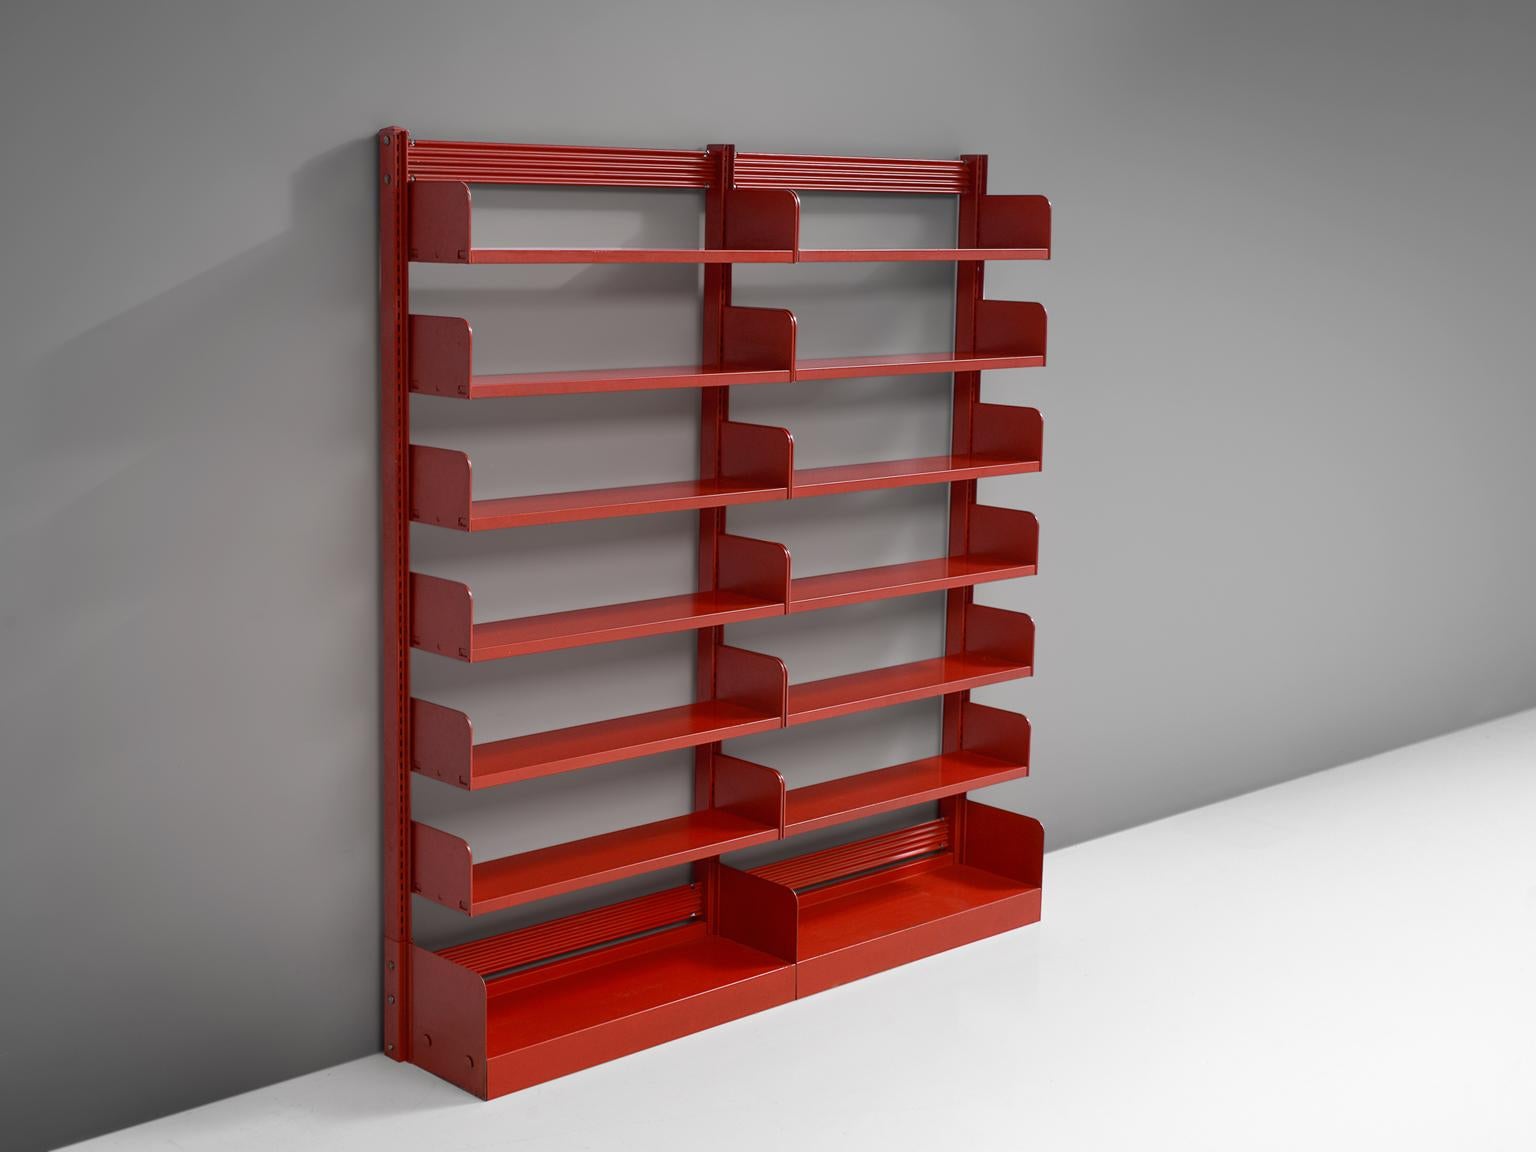 Lips Vago, shelving unit, steel, Italy, 1960s.

The ‘Congresso’ shelf is a modest and strong bookcase made out of steel sheets. The model is freestanding making this a versatile piece. The metal sheets bend upwards at the end of the shelf making